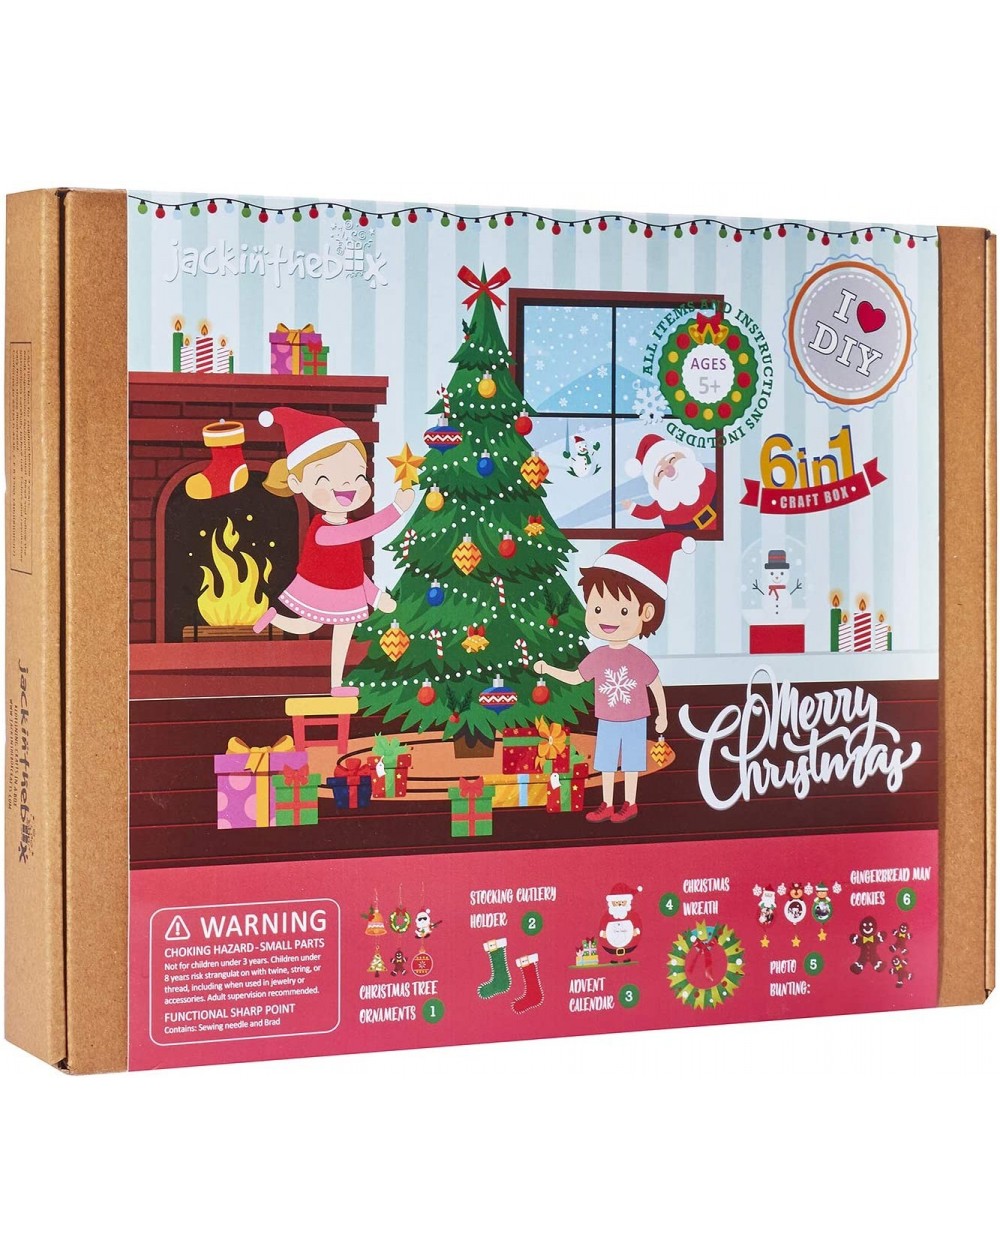 Advent Calendars Parent - Christmas + Easter (Christmas 6-in-1) - C4192DYD78Q $27.80